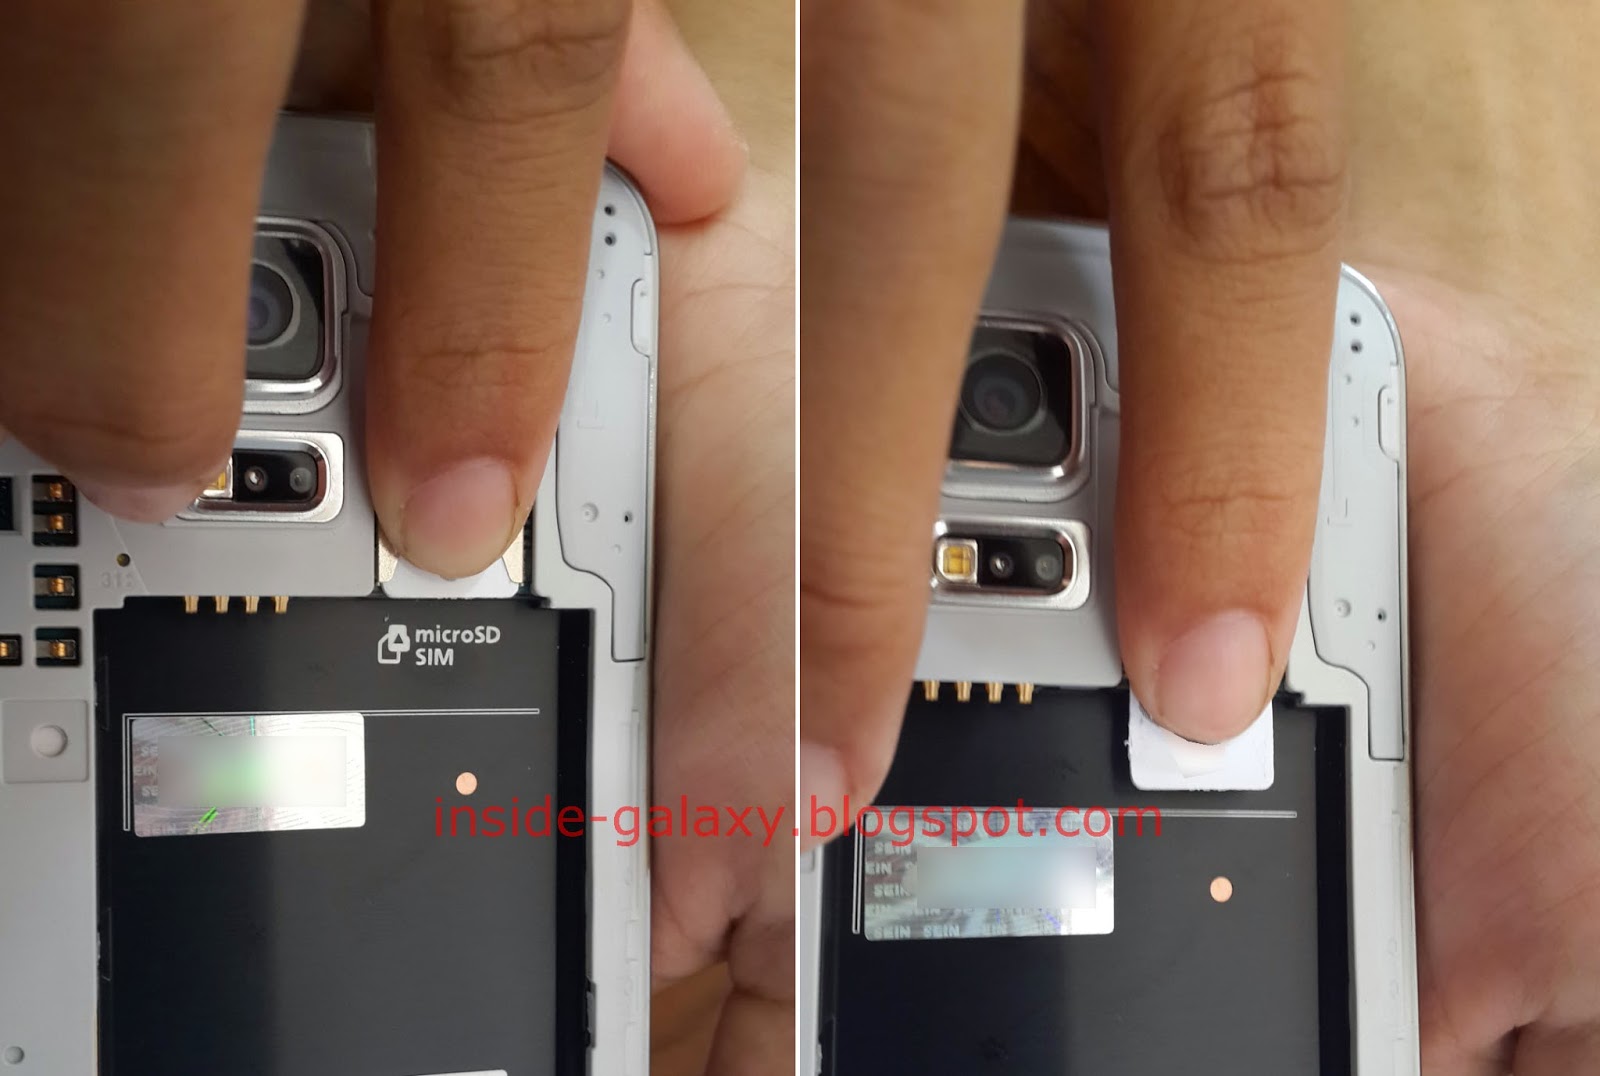 Inside Galaxy Samsung Galaxy S5 How To Insert Or Remove A Micro